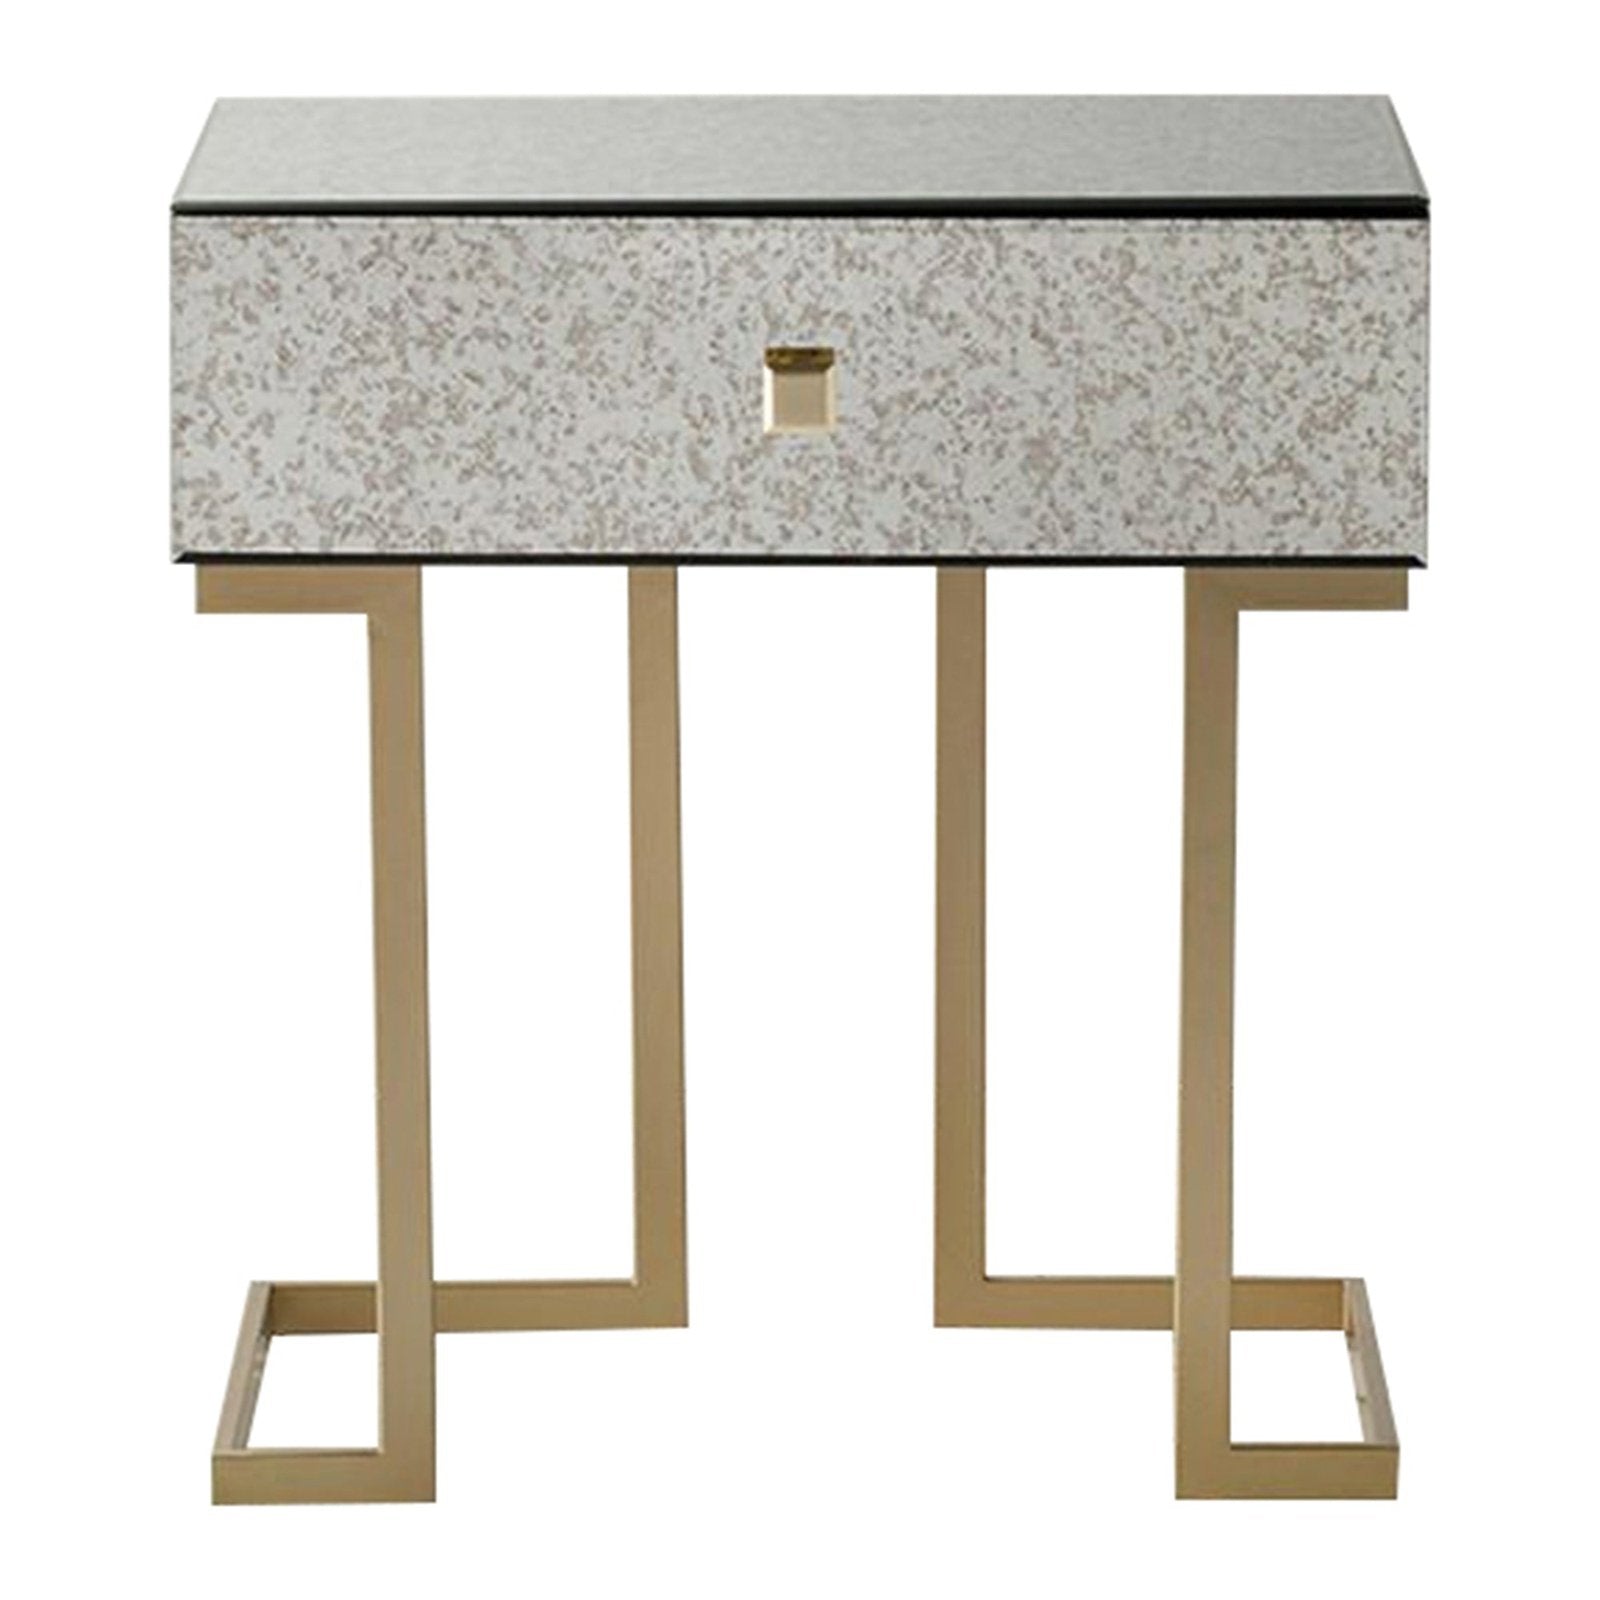 Rizzo 1 Drawer Side Table - Brushed Brass Effect Iron Legs & Handles - Antiqued Glass Tops - Art Deco